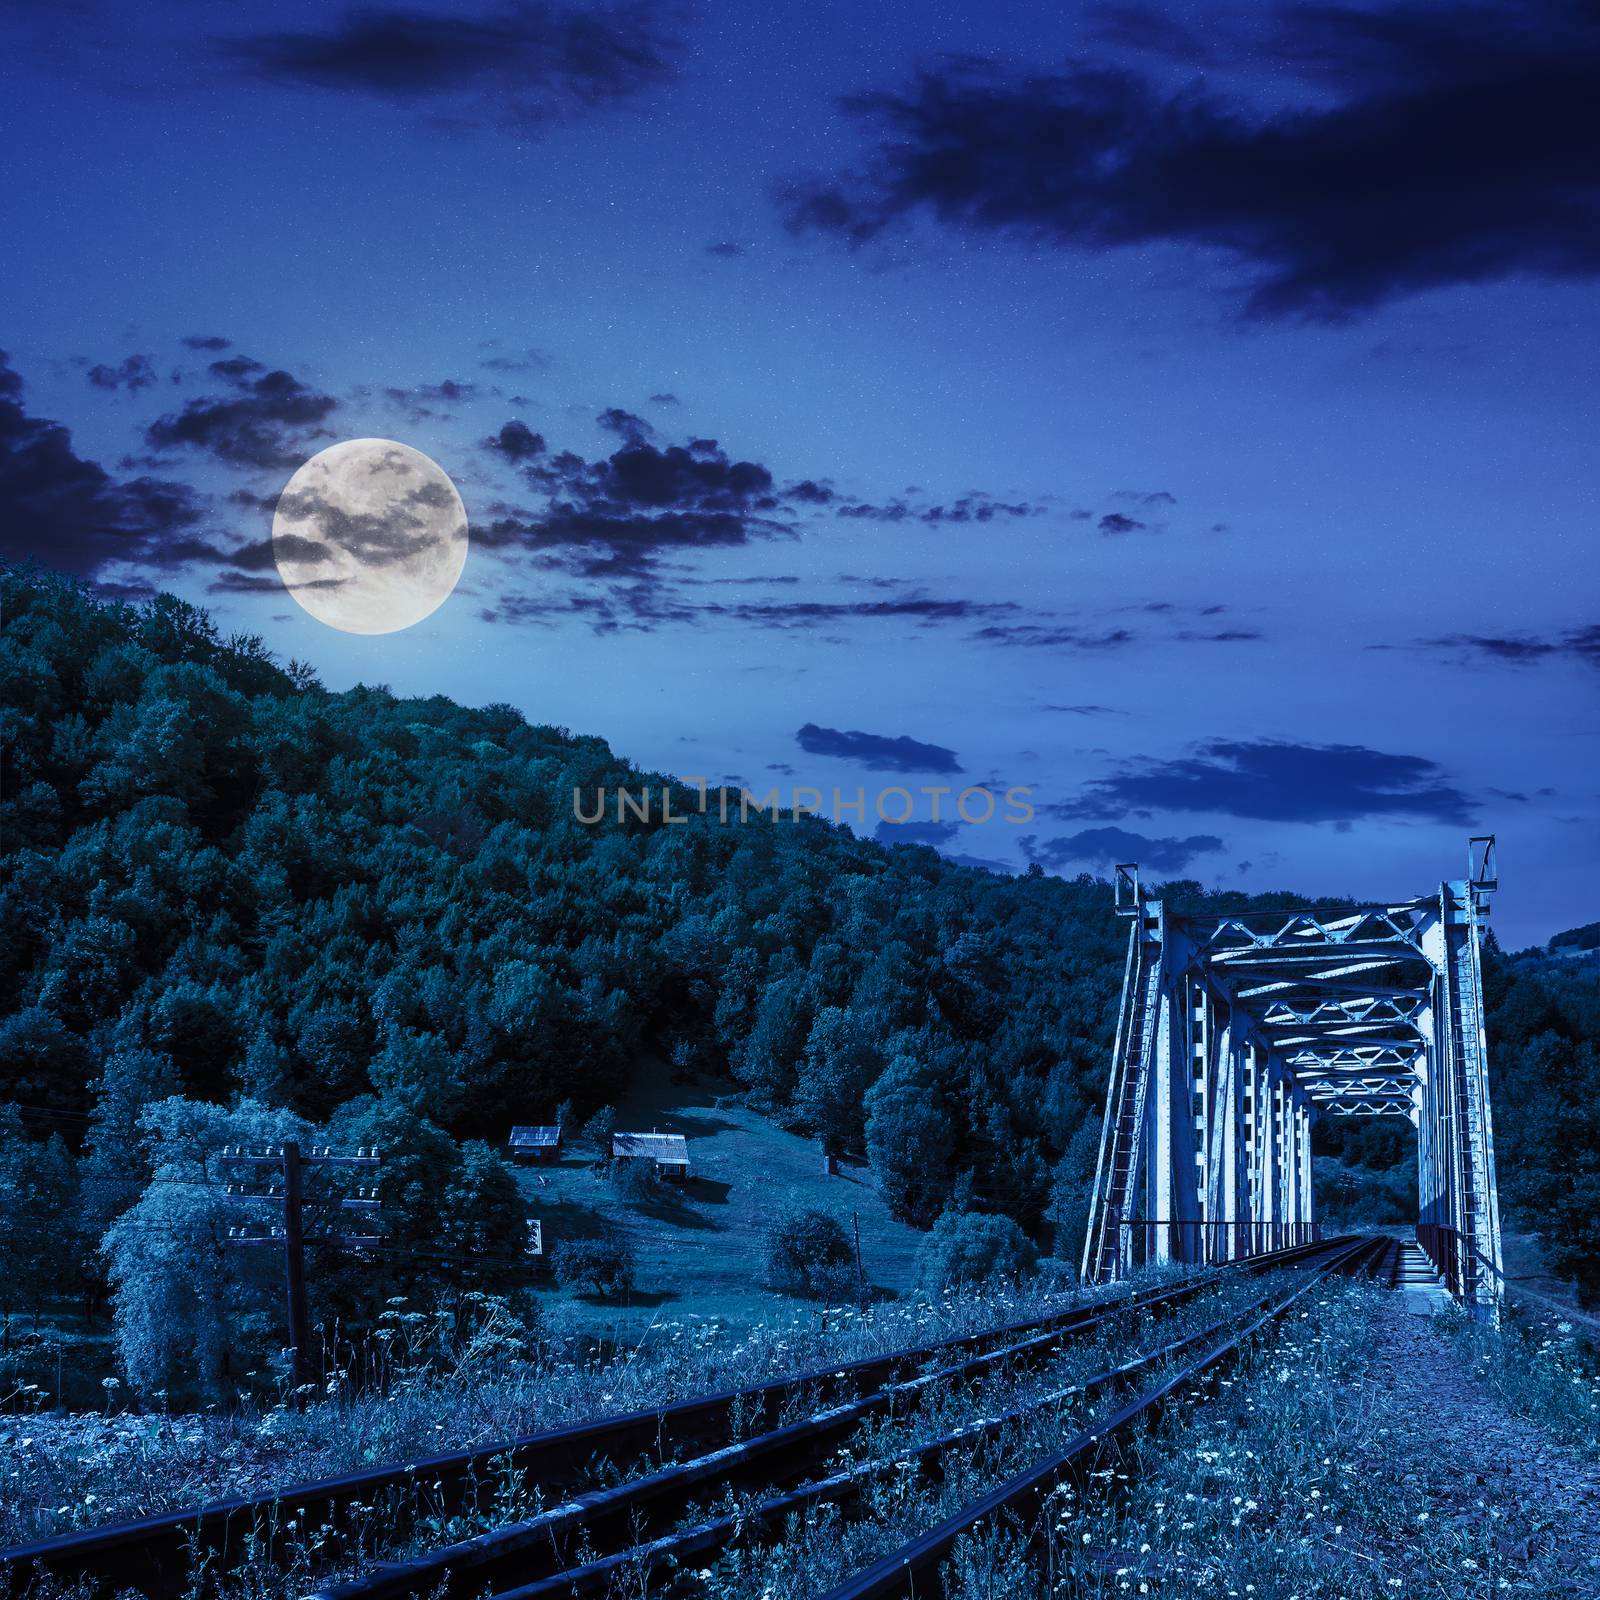 old railroad passes in mountain village at night by Pellinni